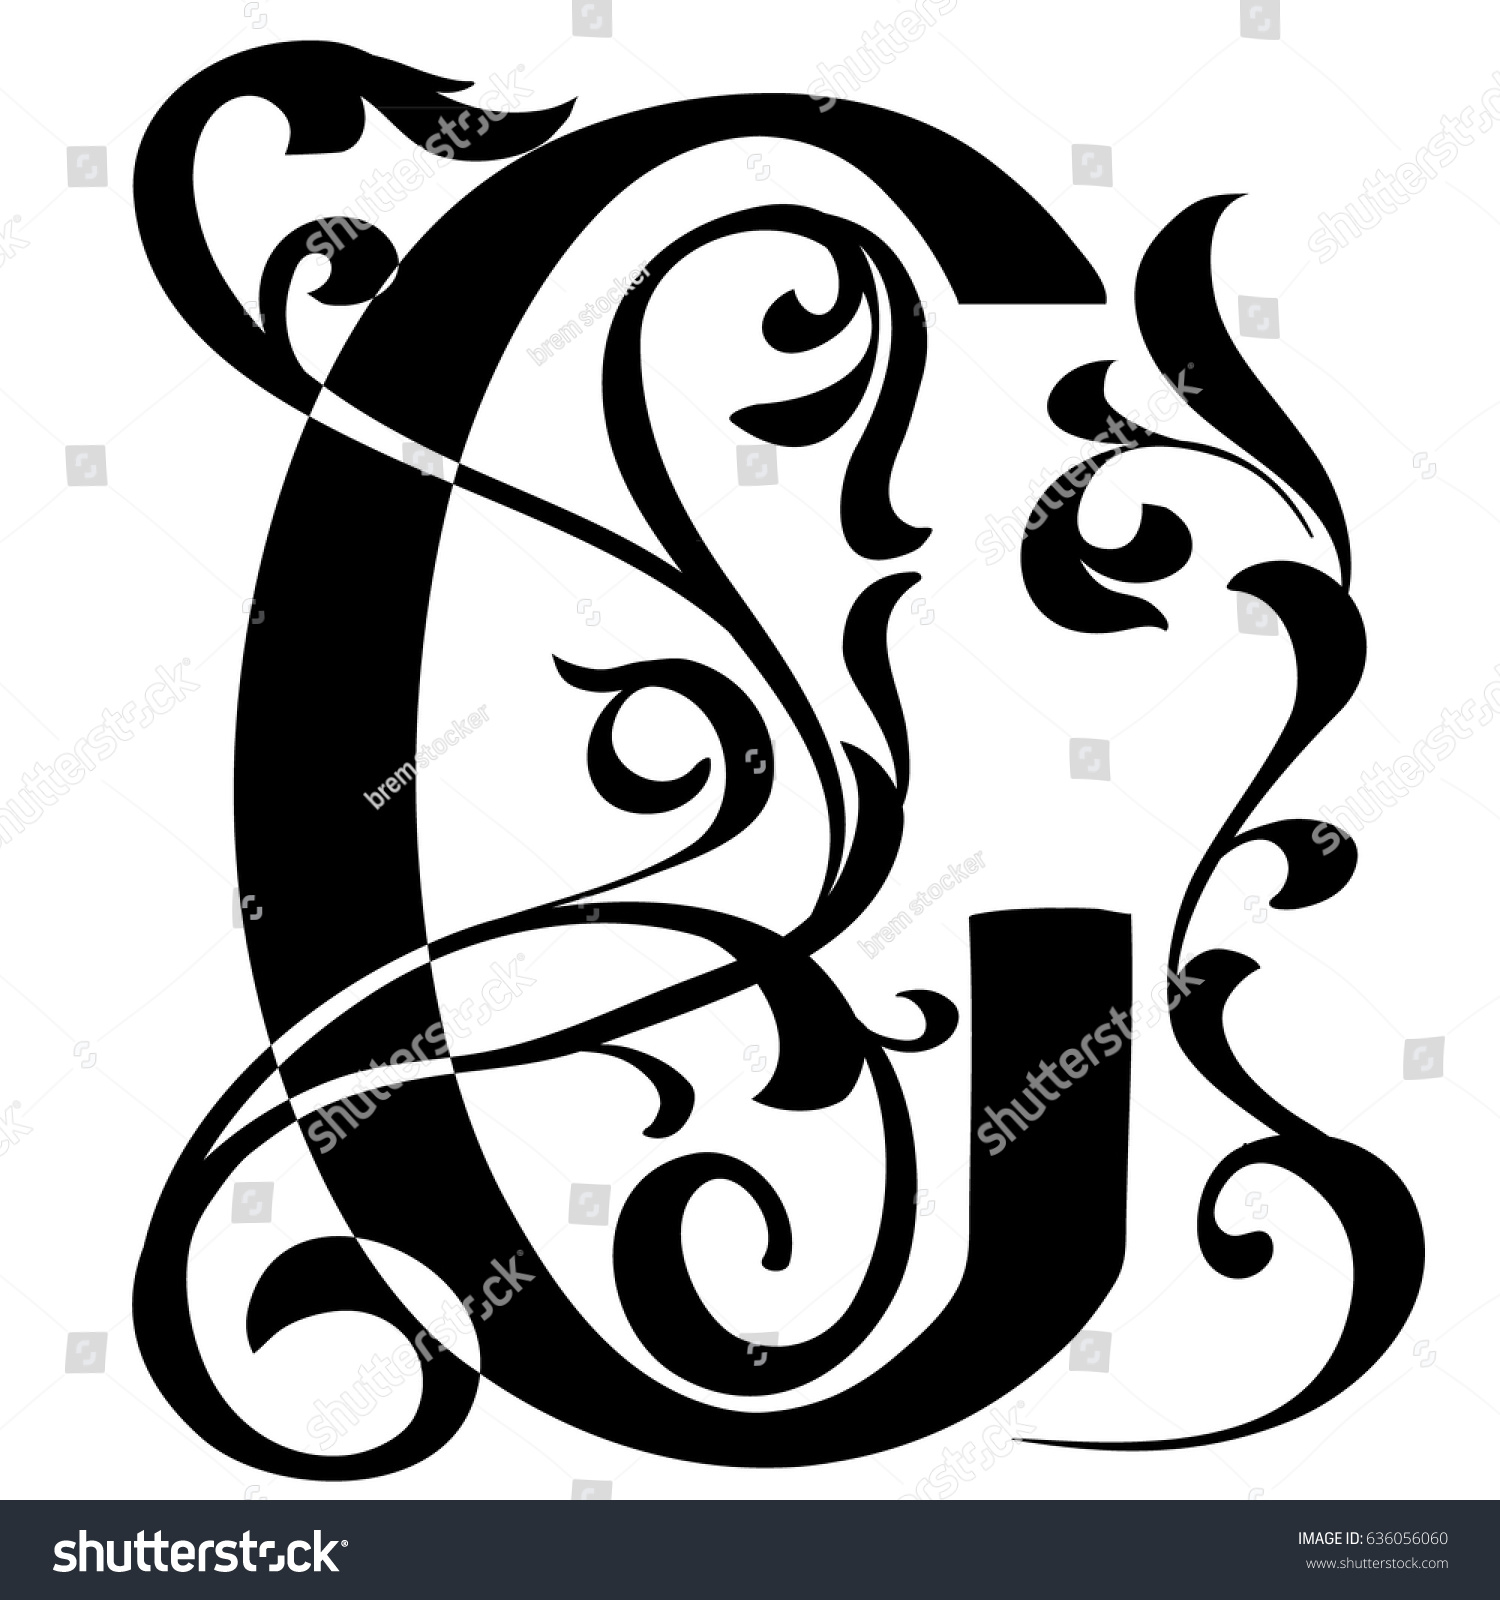 Capital Letter G Large Letter Illuminated Stock Vector (Royalty Free ...